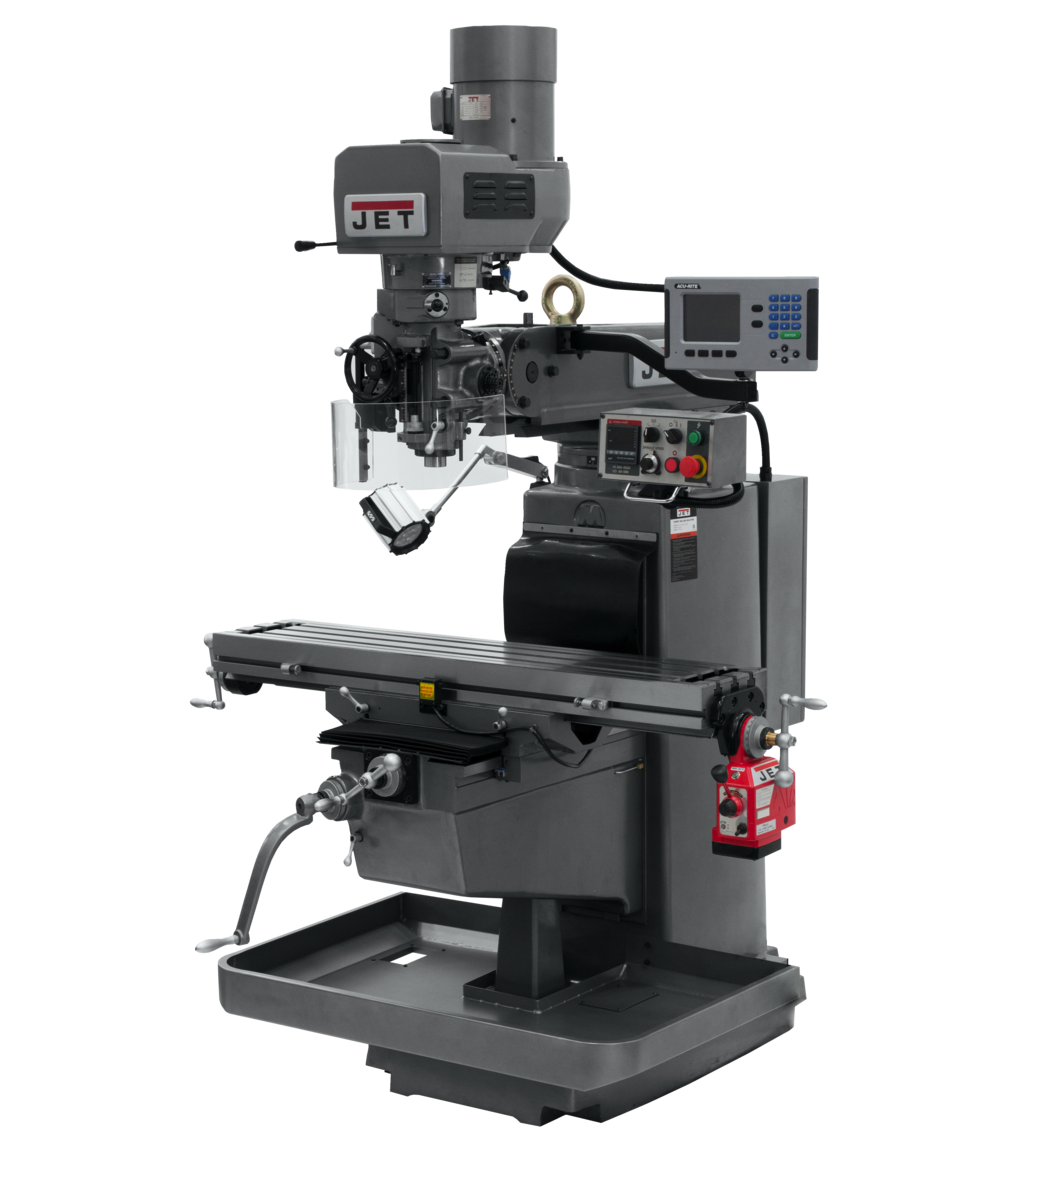 JTM-1050EVS2/230 Mill With 3-Axis Acu-Rite 203 DRO (Quill) With X-Axis Powerfeed